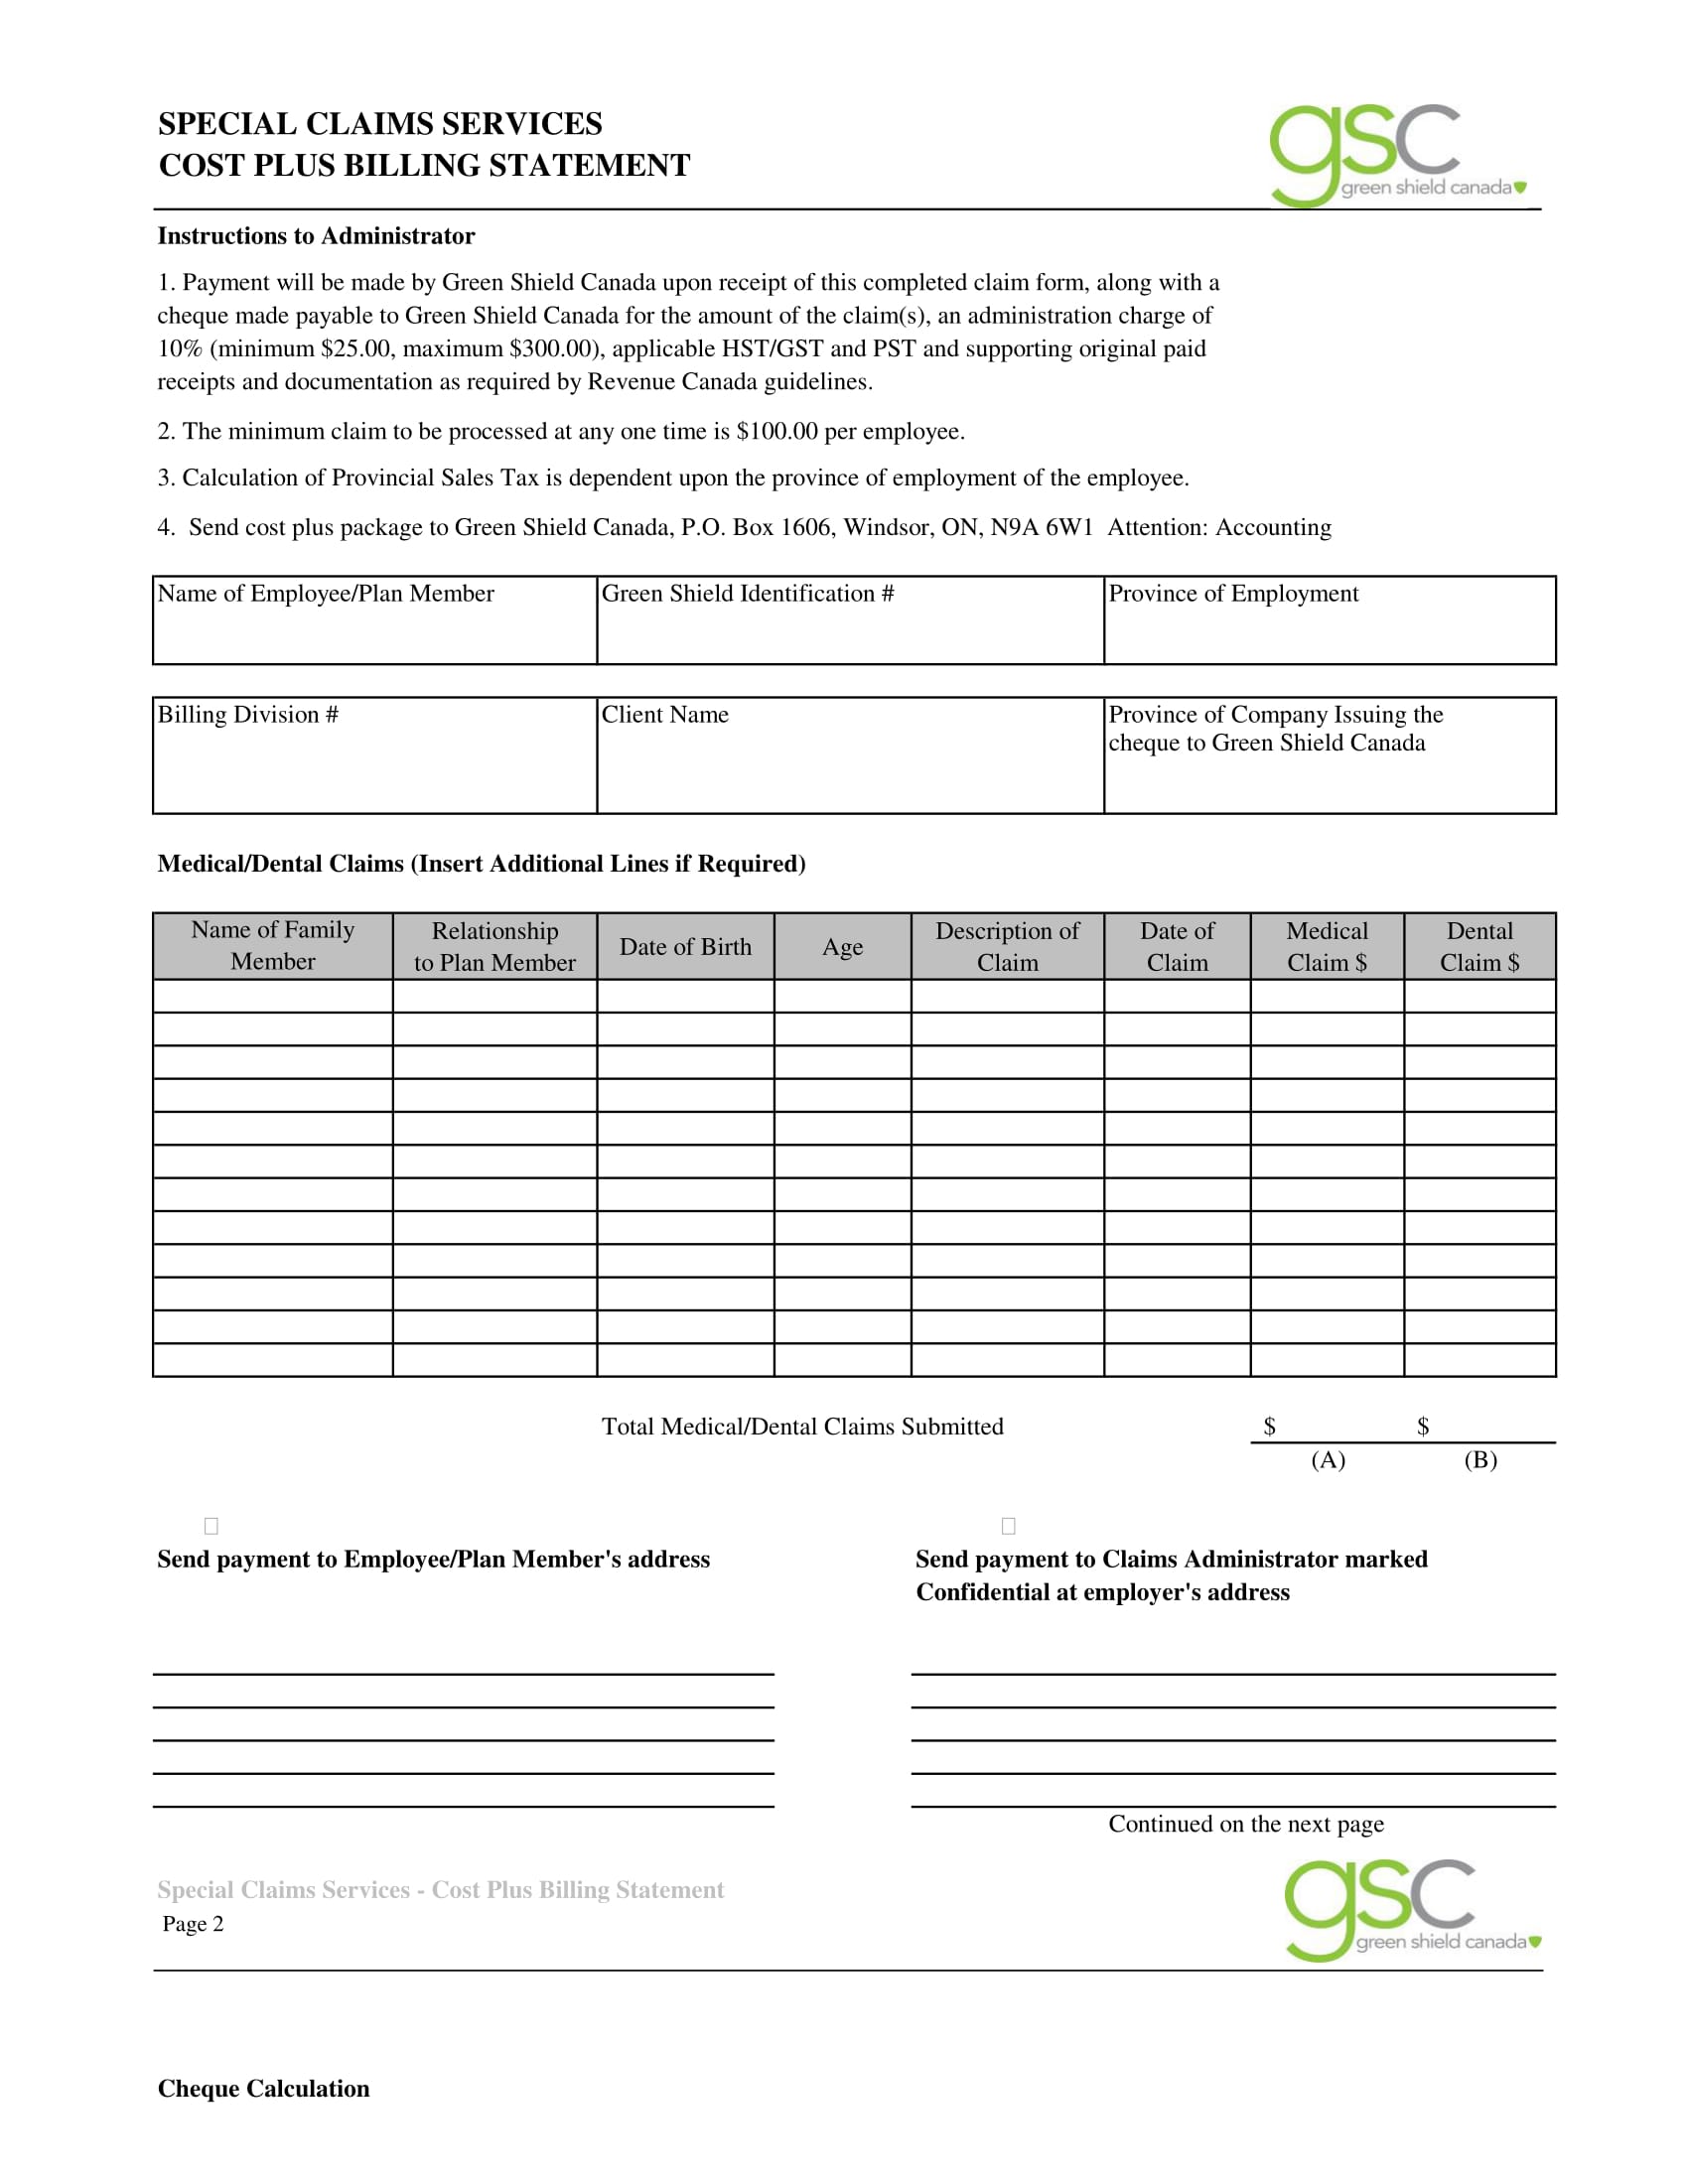 special claims billing statement form 1